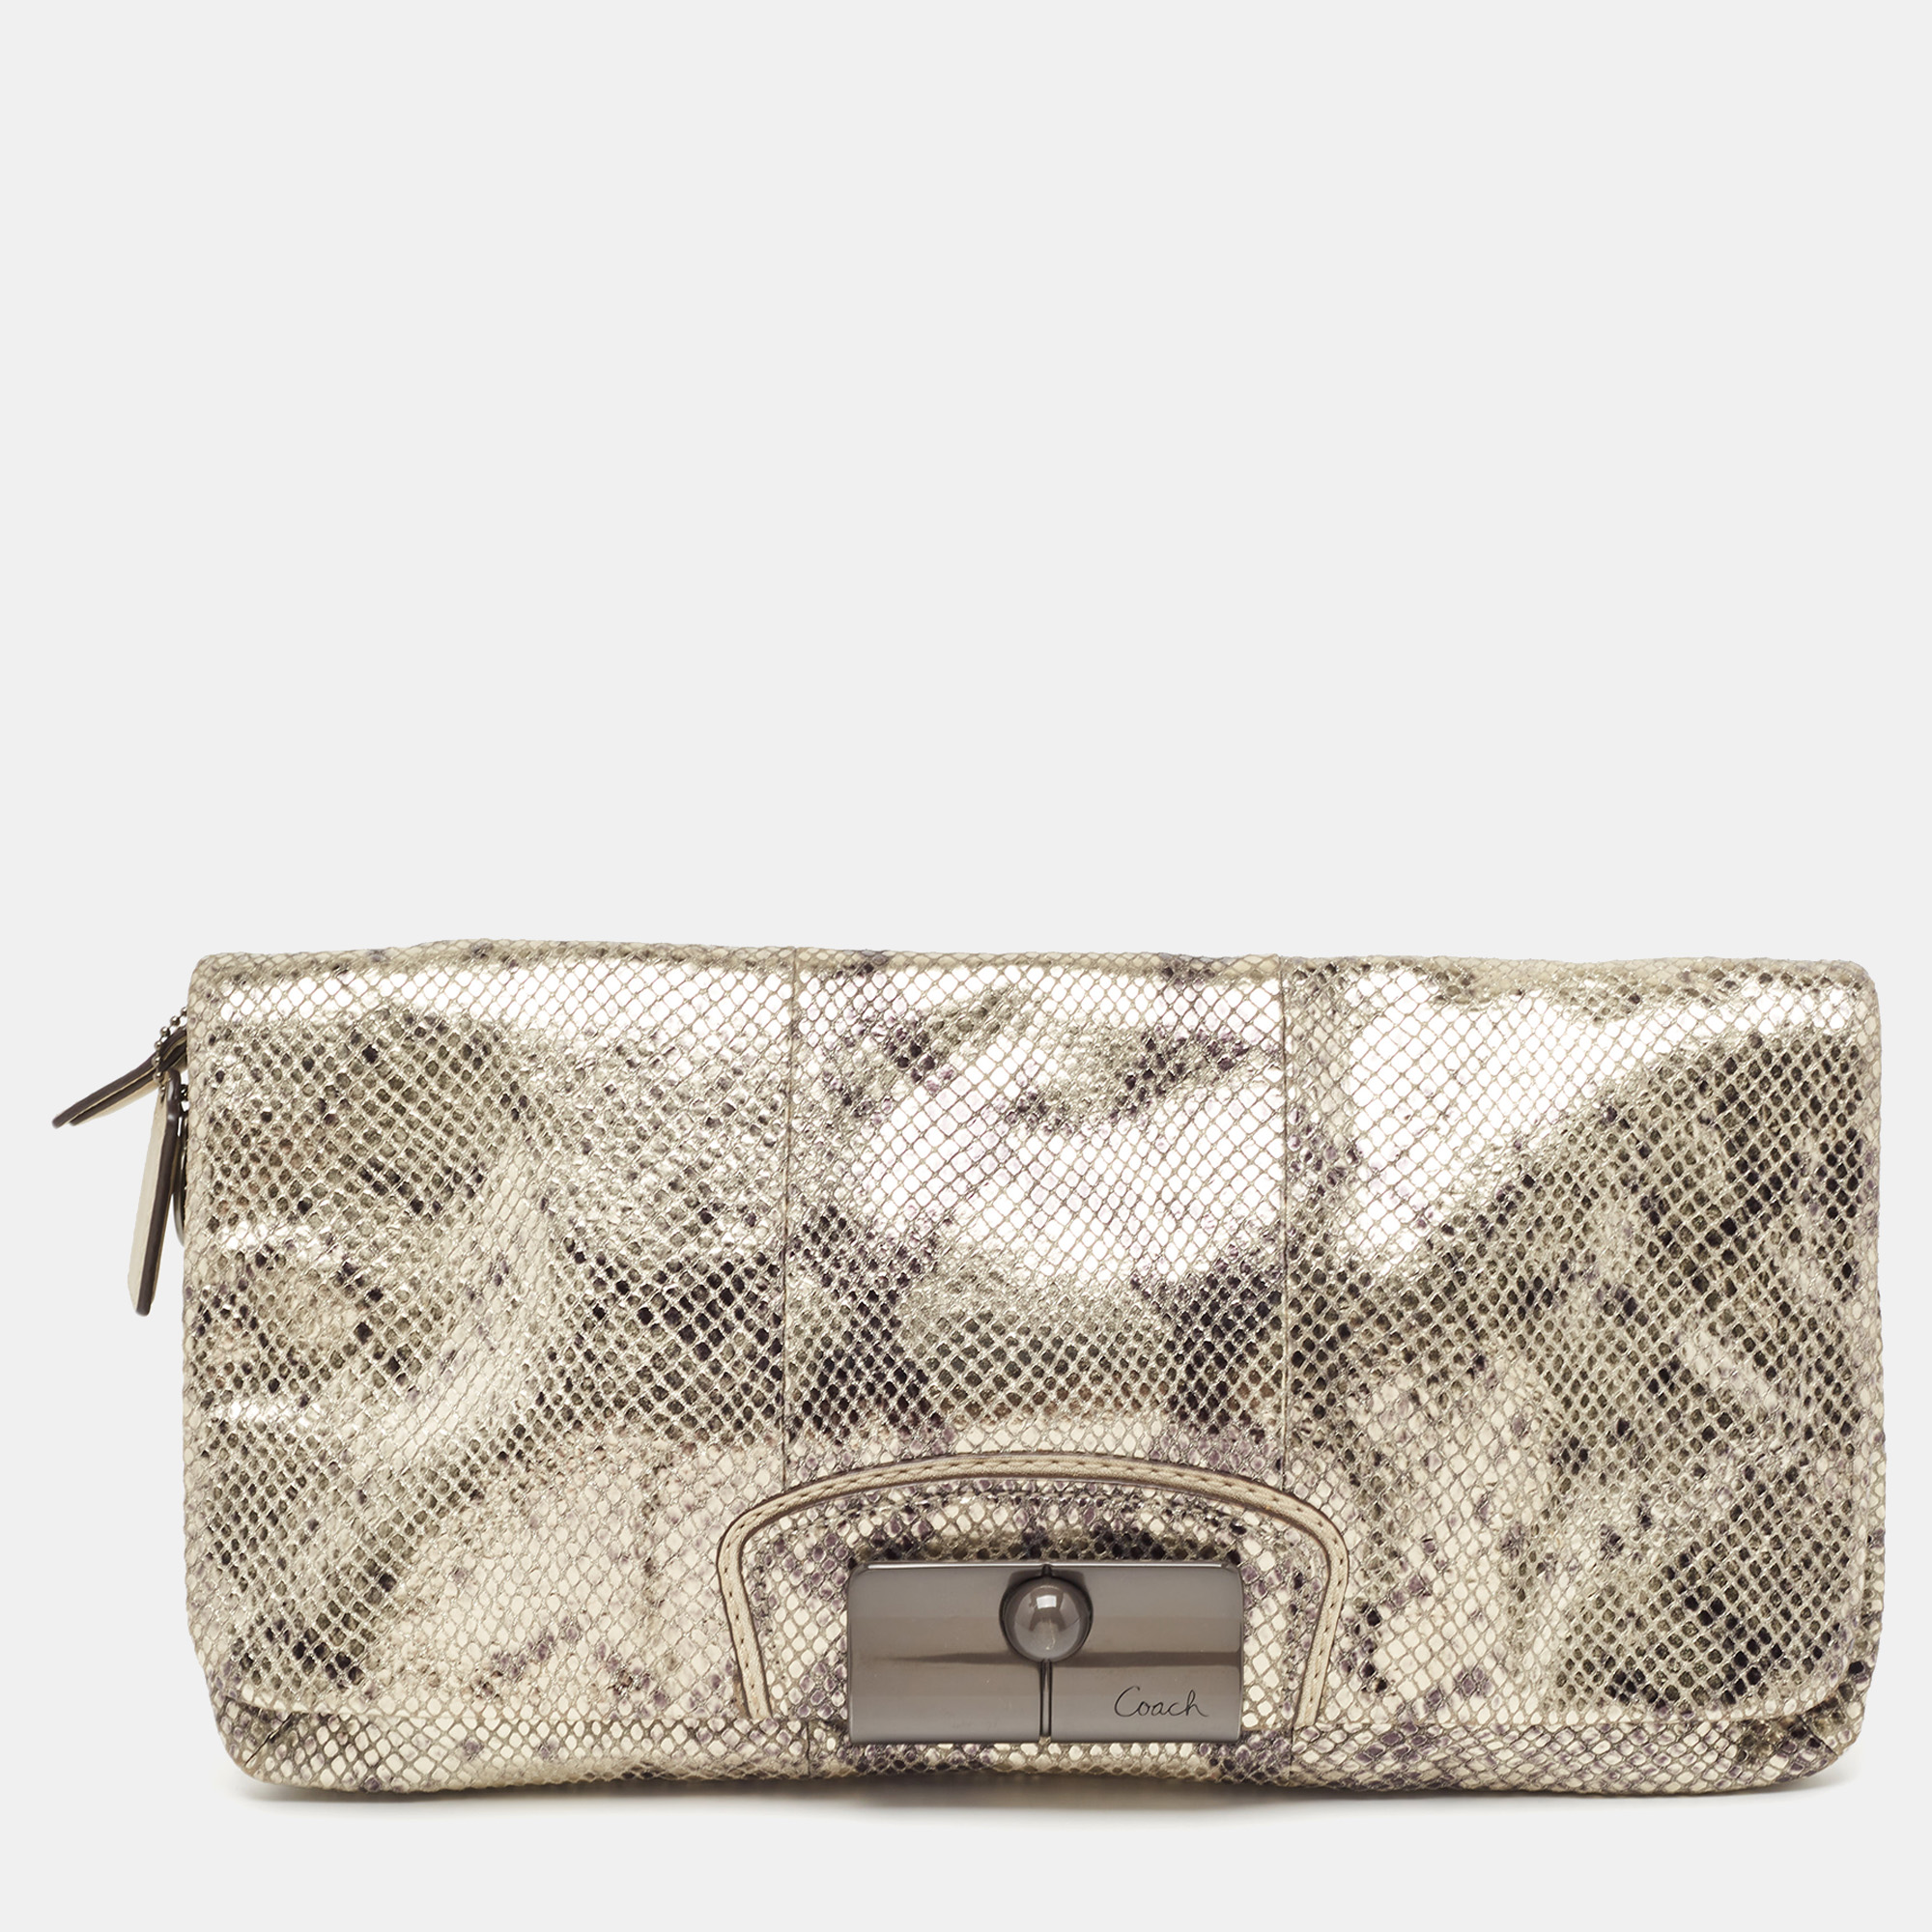 

Coach Metallic Silver/Black Python Embossed Leather Flap Clutch